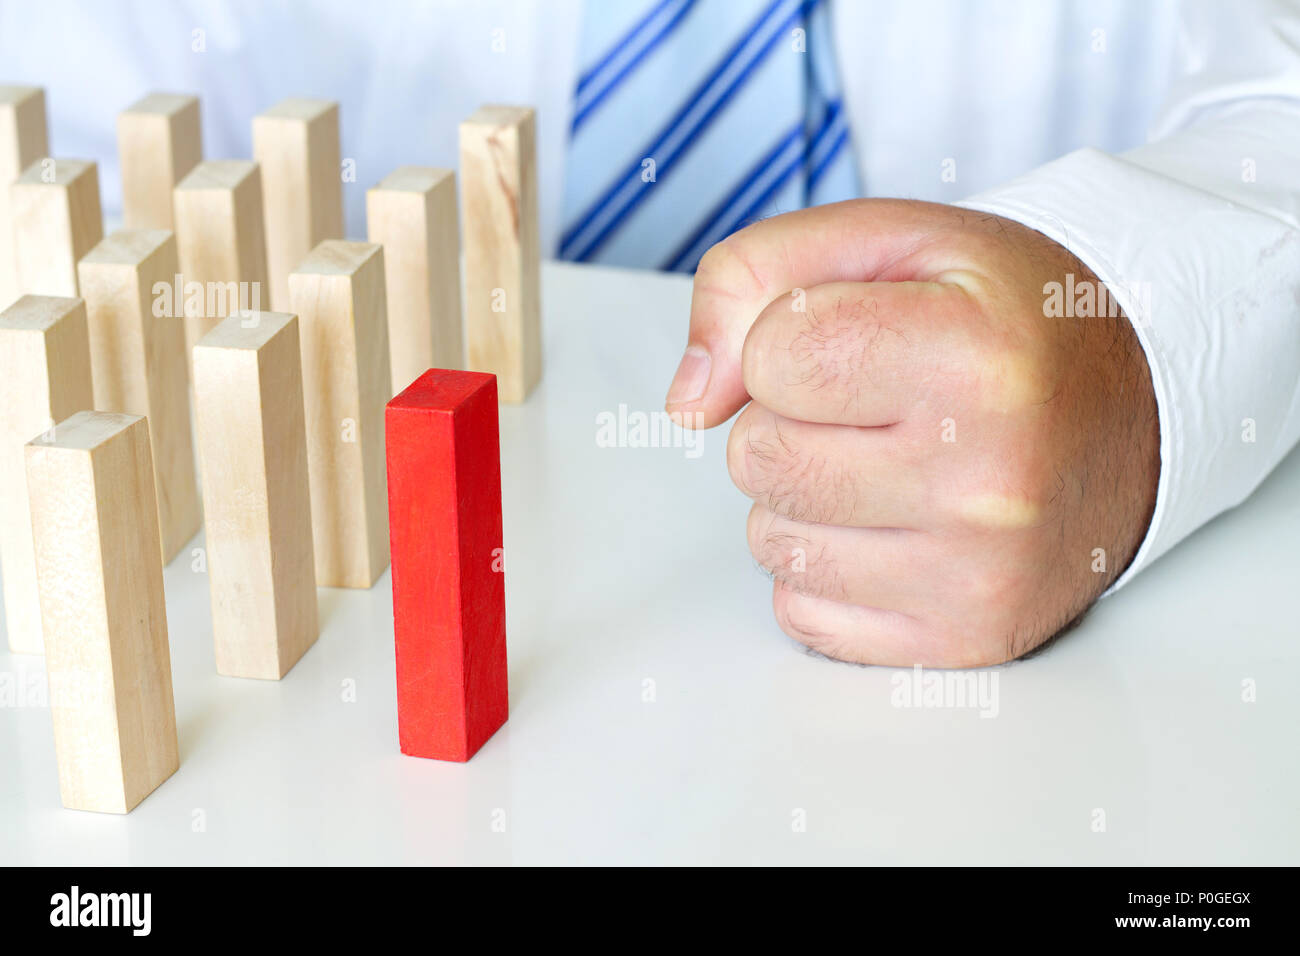 Bad angry boss and problems at work abstract business concept Stock Photo